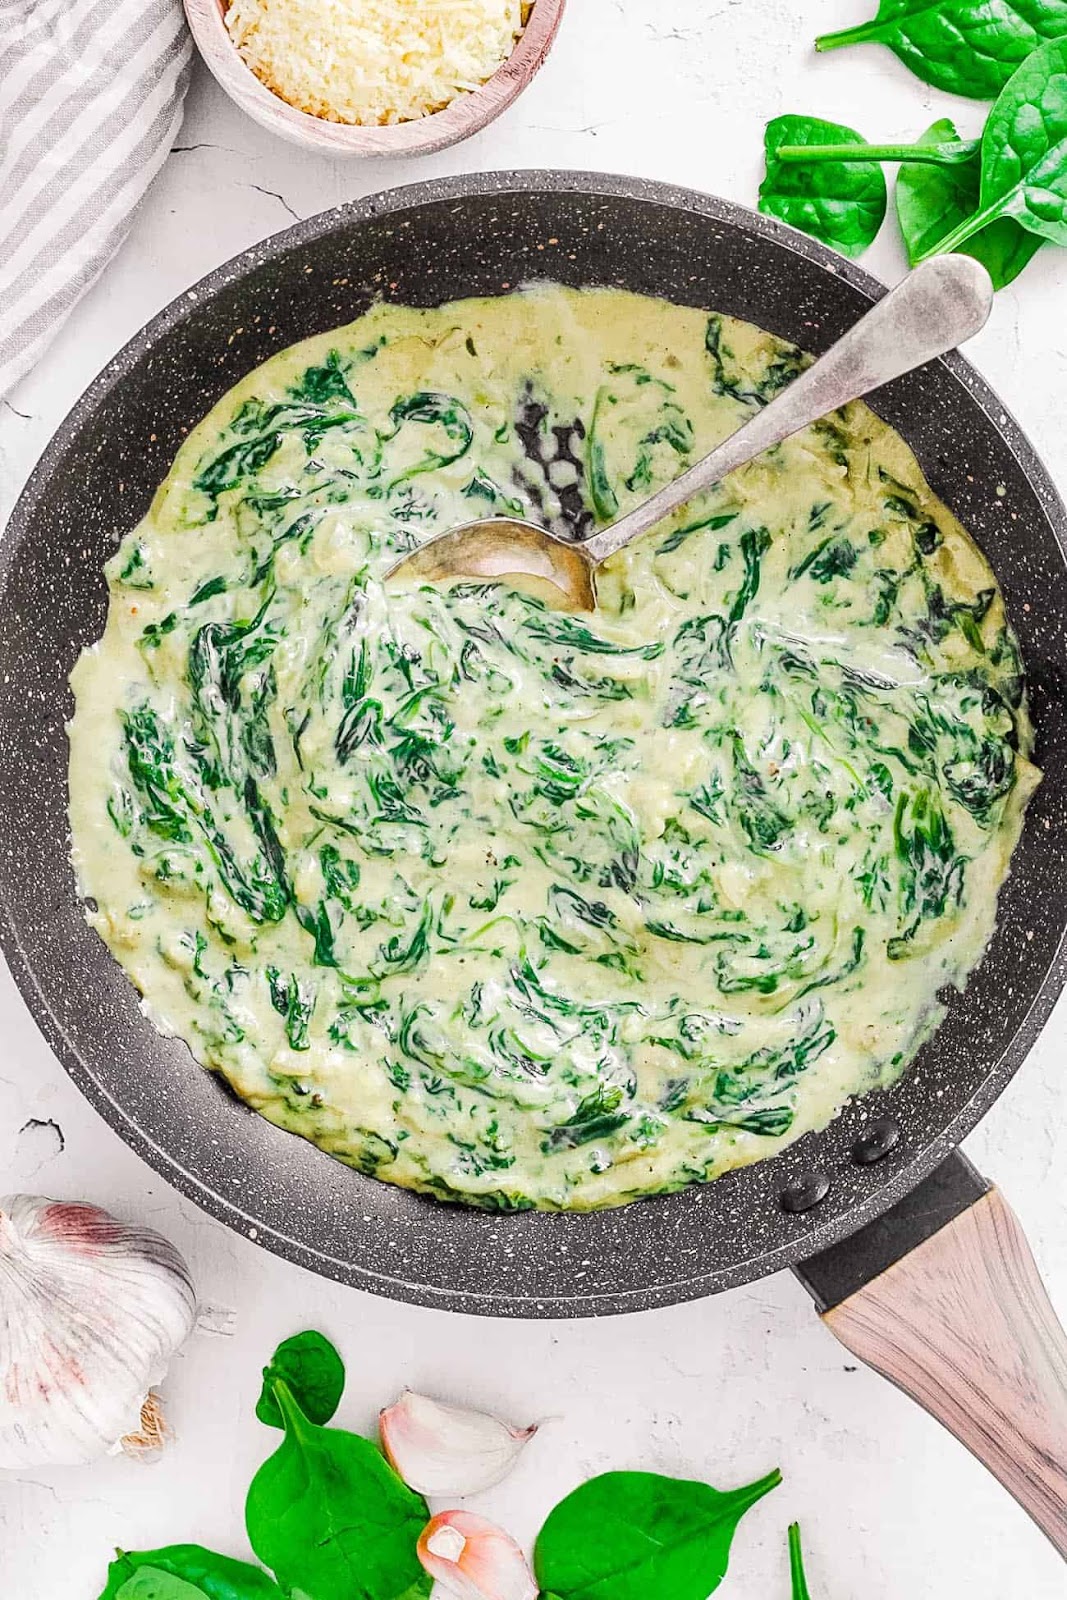 Creamed spinach dip in a black pan.